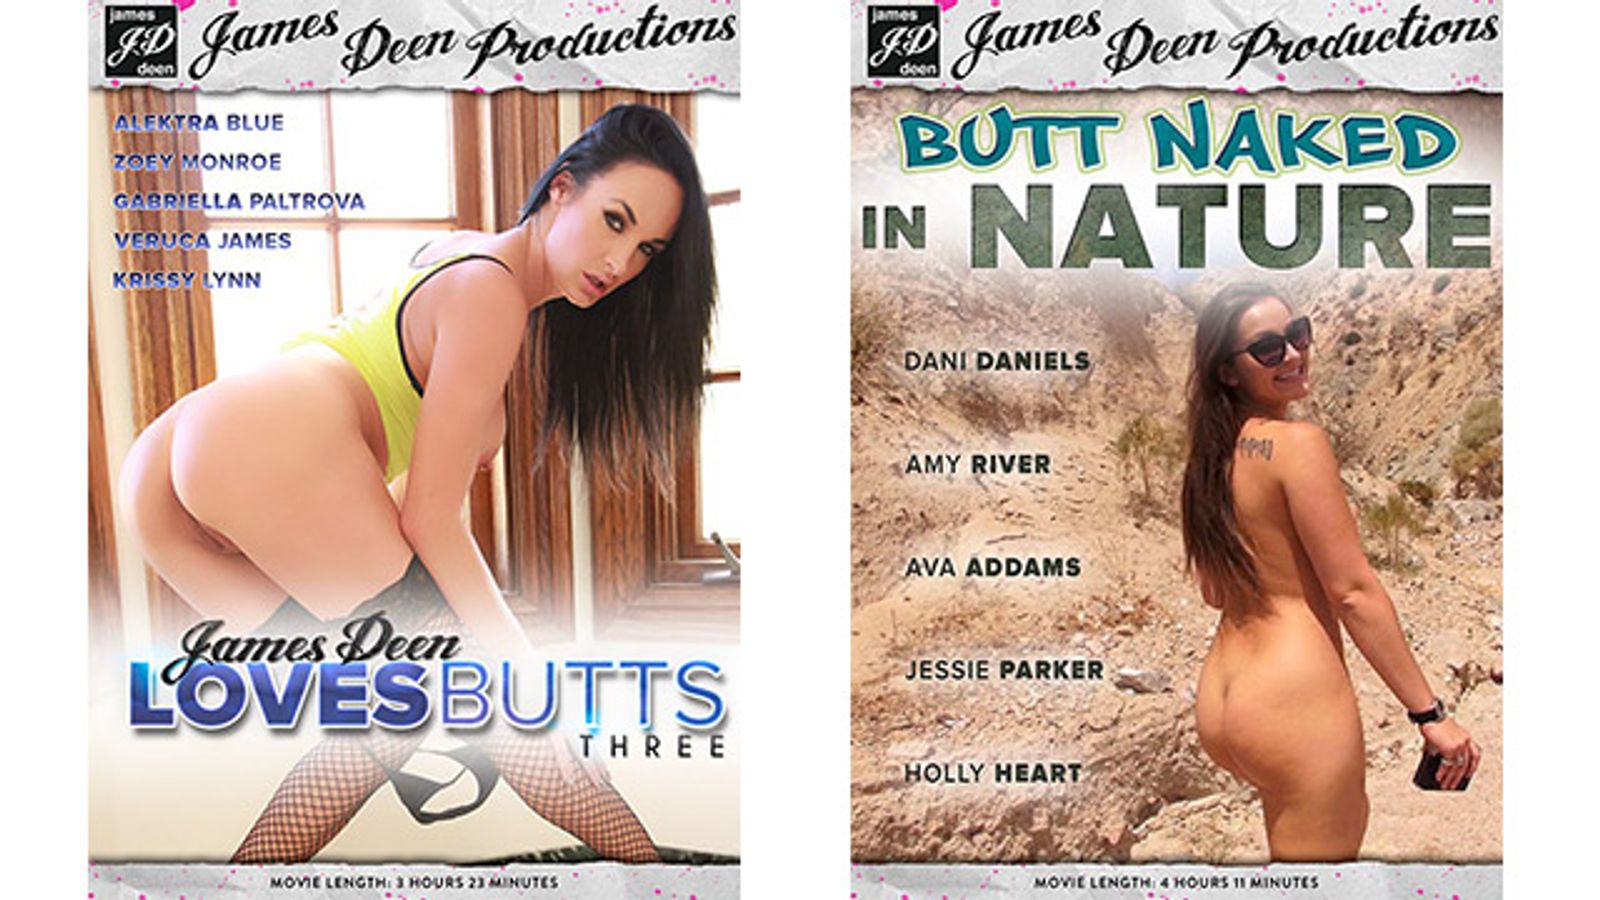 2 James Deen Releases Feature Bootylicious Babes, Outdoor Sex